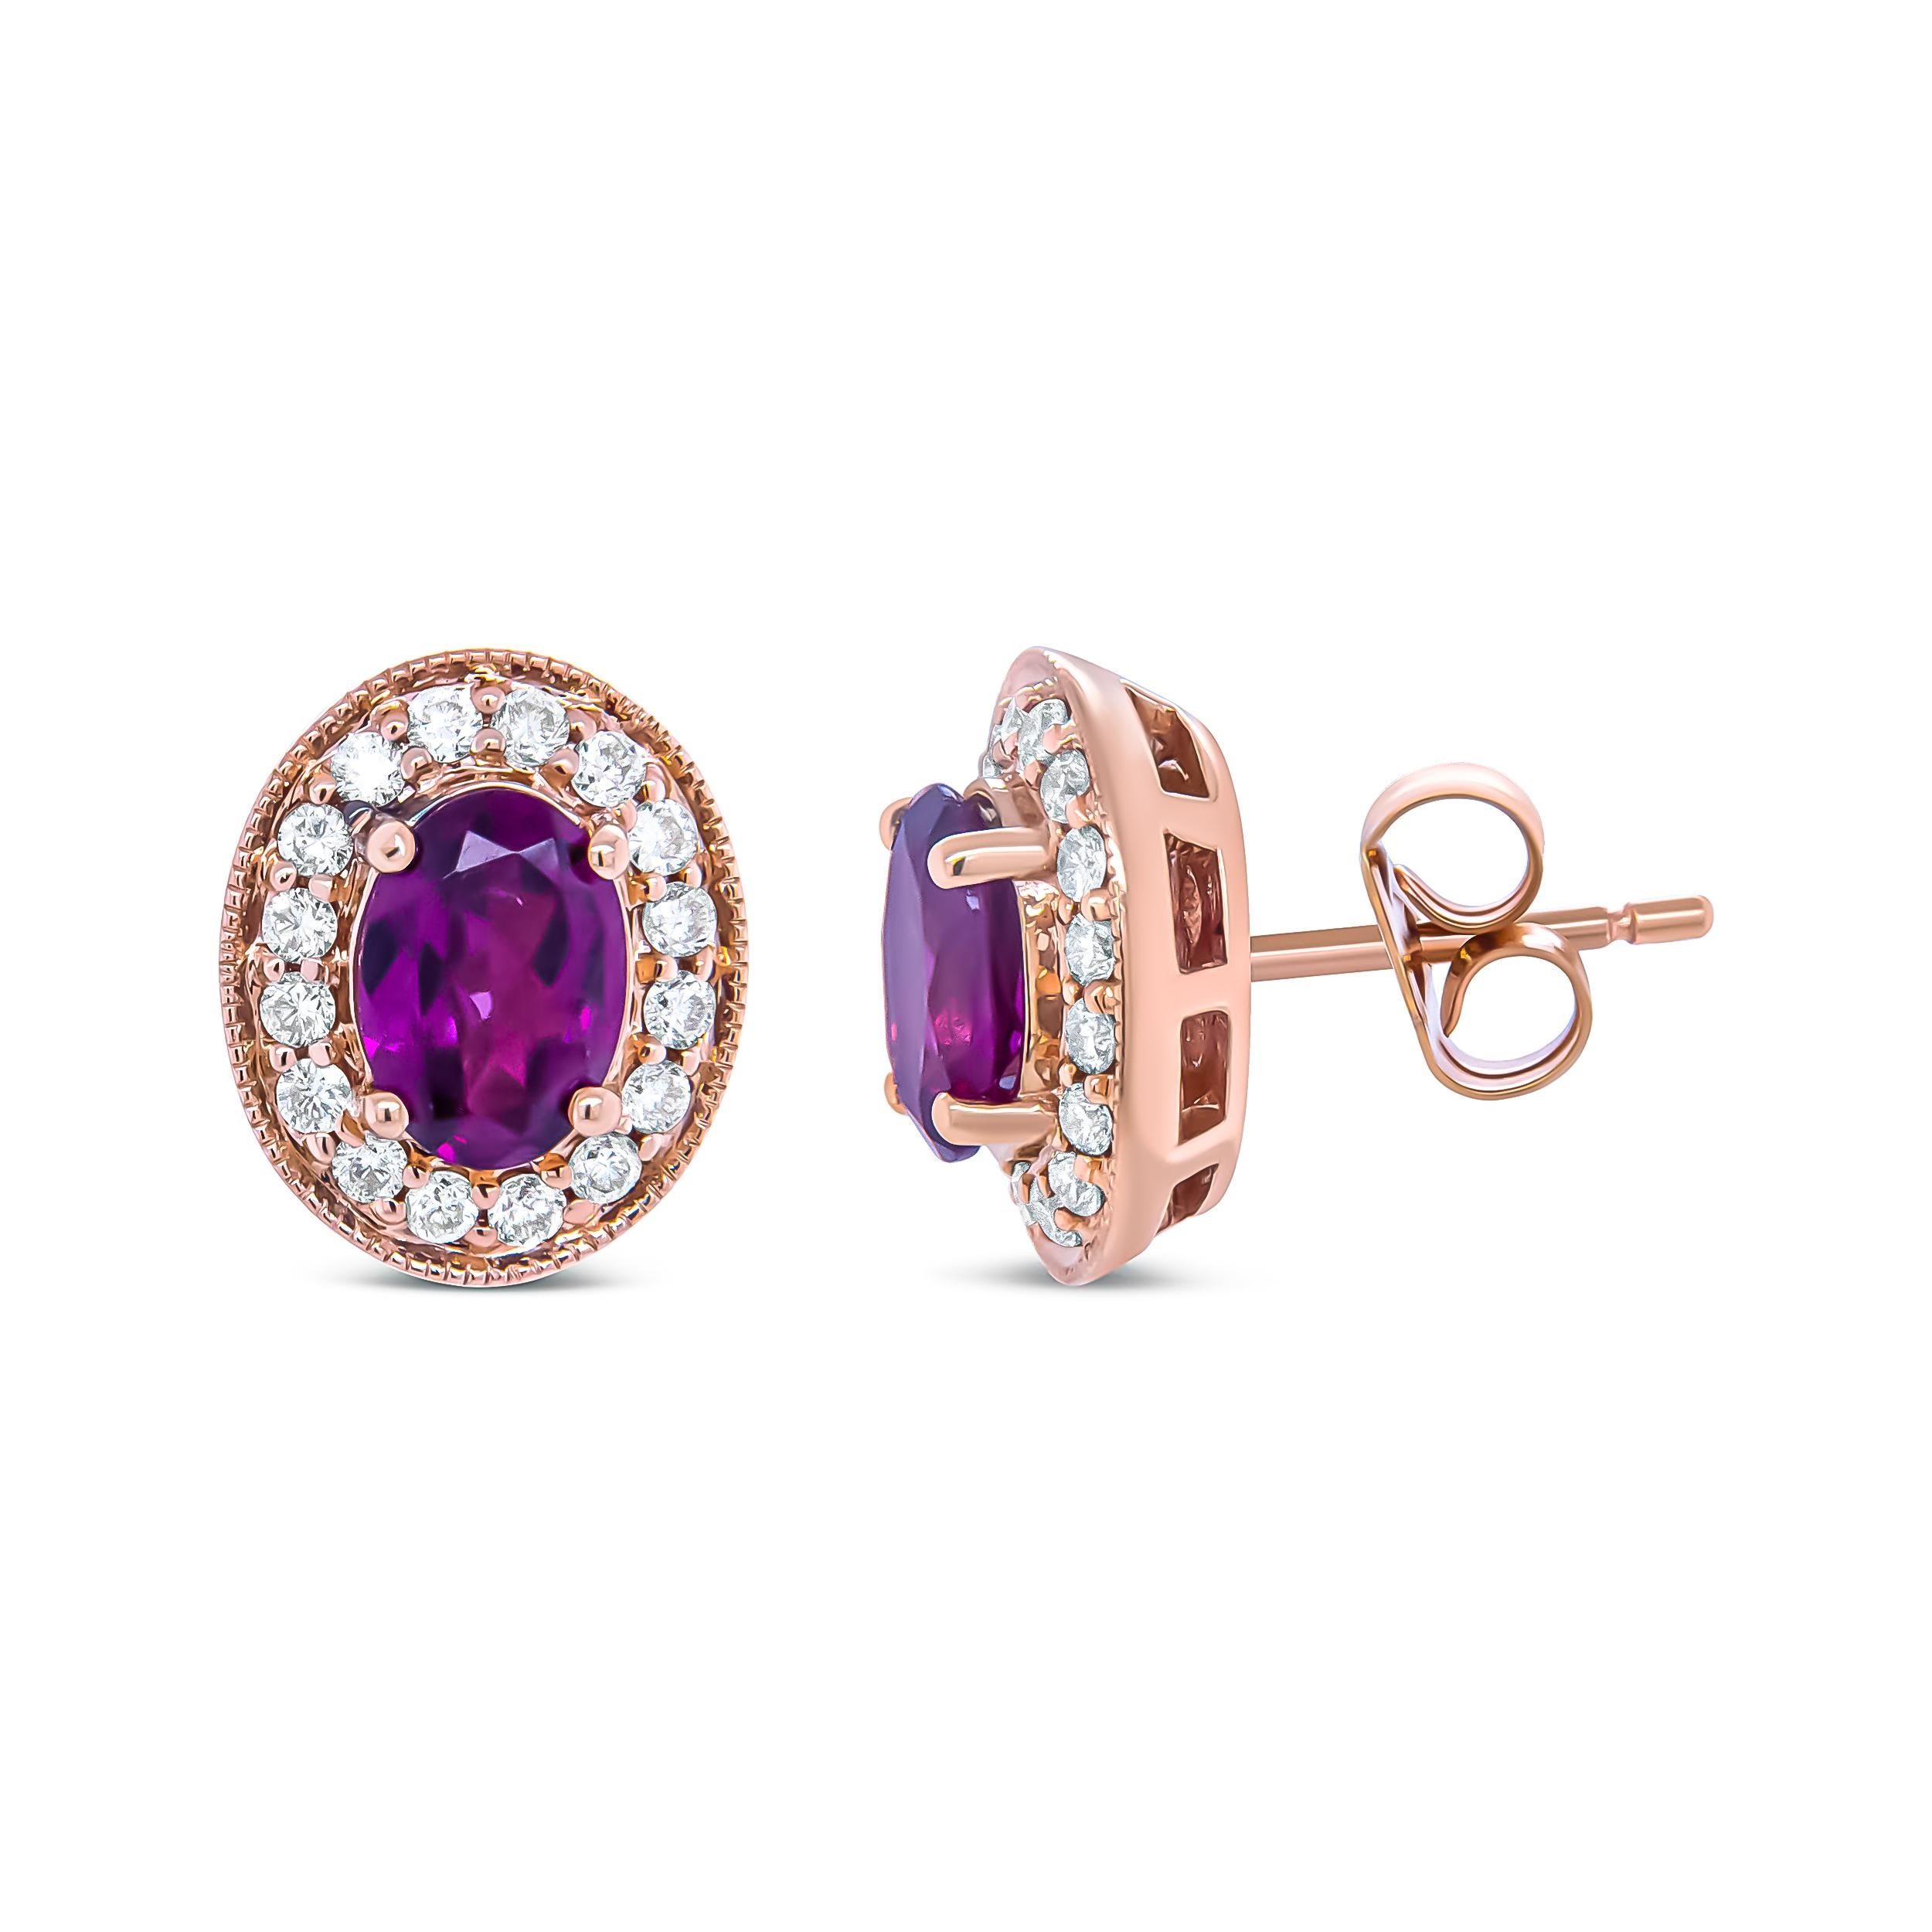 Contemporary 14K Rose Gold Oval Cut Garnet and 3/8 Carat Round Diamond Halo Stud Earrings For Sale